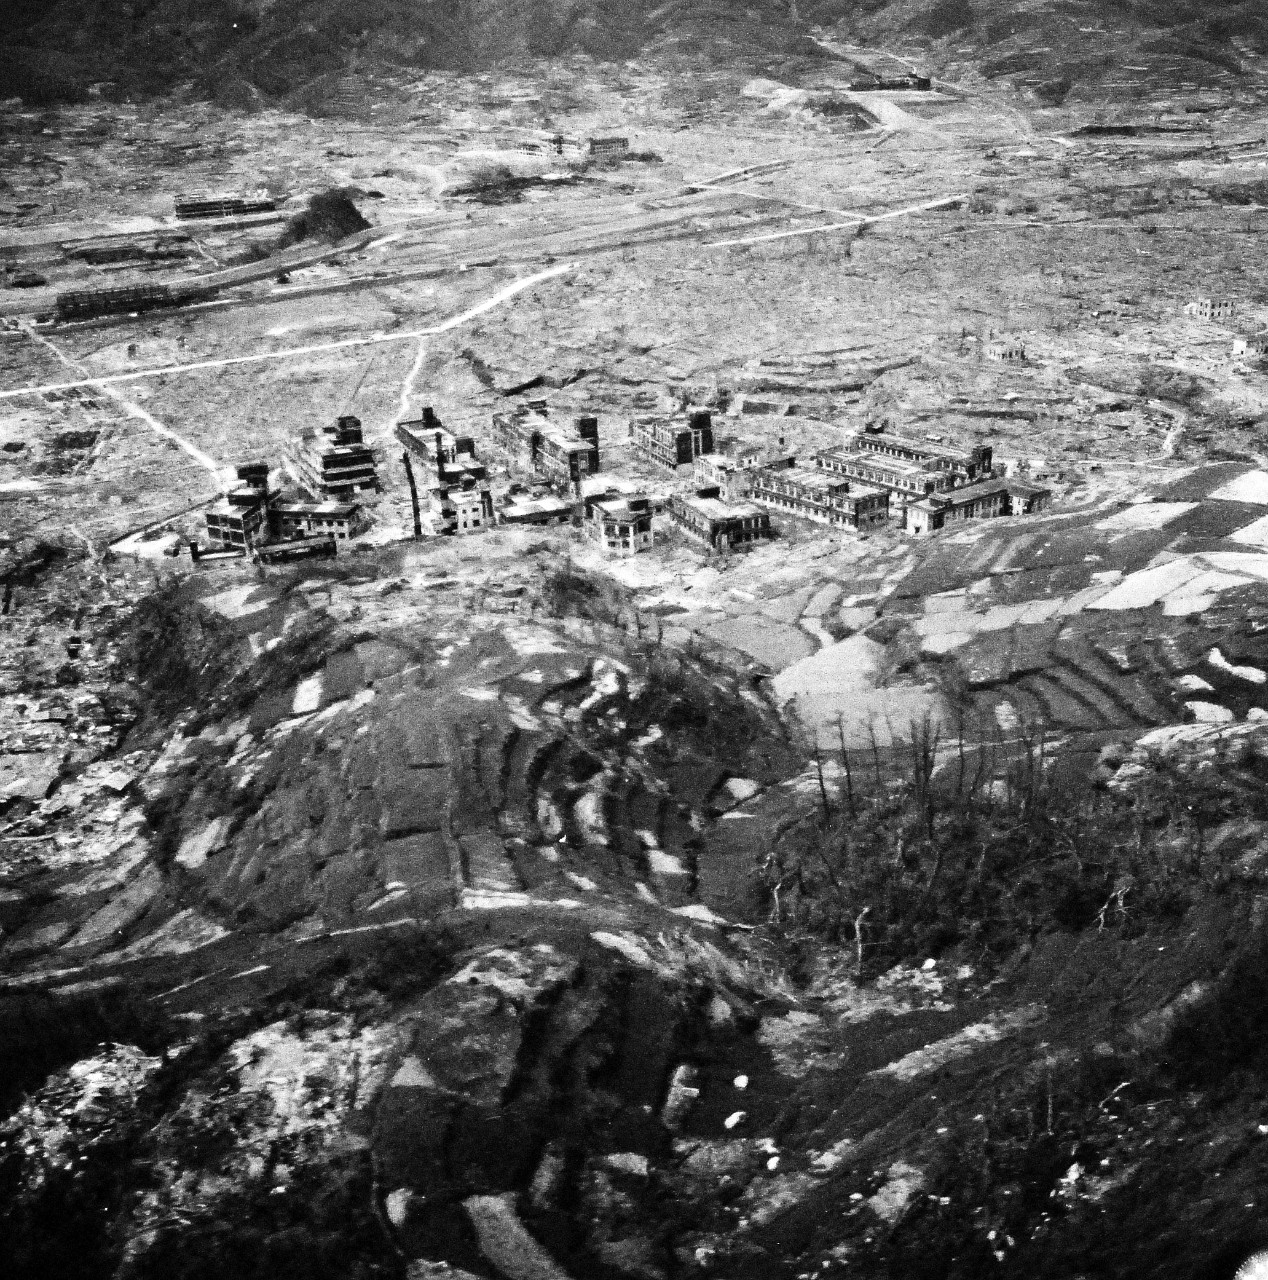 80-G-264929:   Nagasaki, Japan, 1945.    Aerial view of the bomb damage from August 9, 1945.  Altitude of 300’.  Photographed by USS Chenango (CVE 28) aircraft on October 15, 1945.  .   Official U.S. Navy photograph, now in the collections of the National Archives.   (2015/12/01).